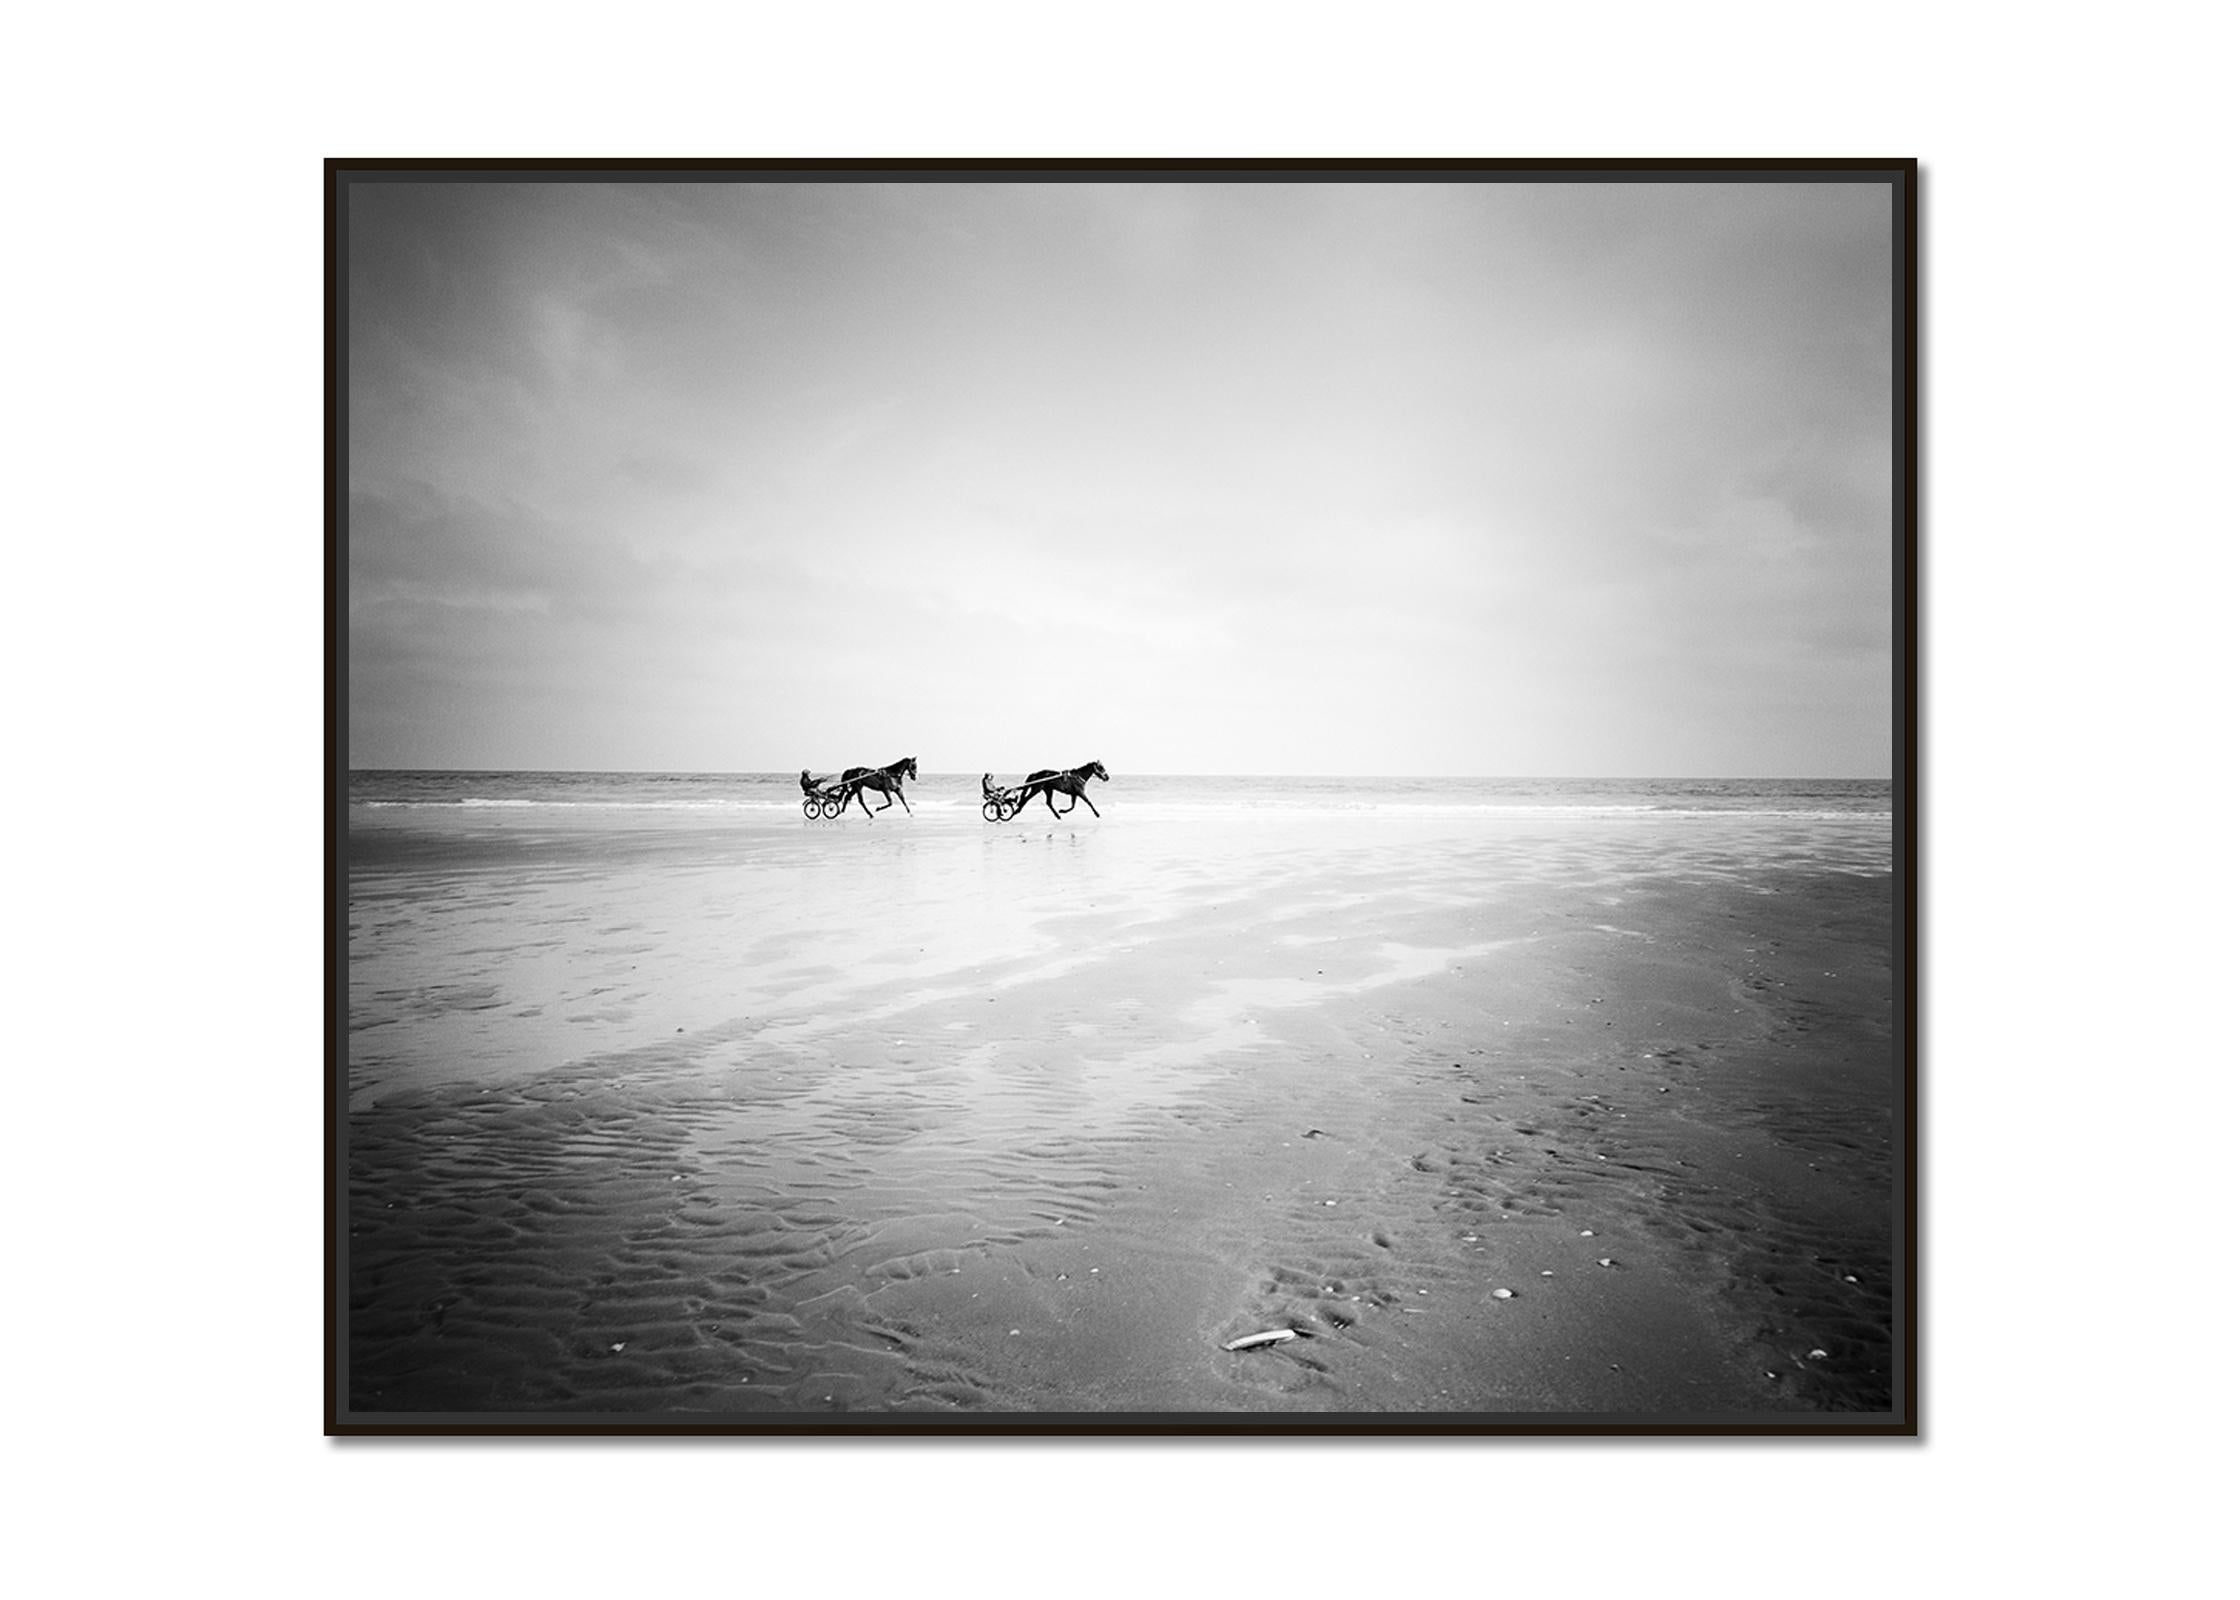 Harness Racing, horse riding, beach, black and white photography, landscape - Photograph by Gerald Berghammer